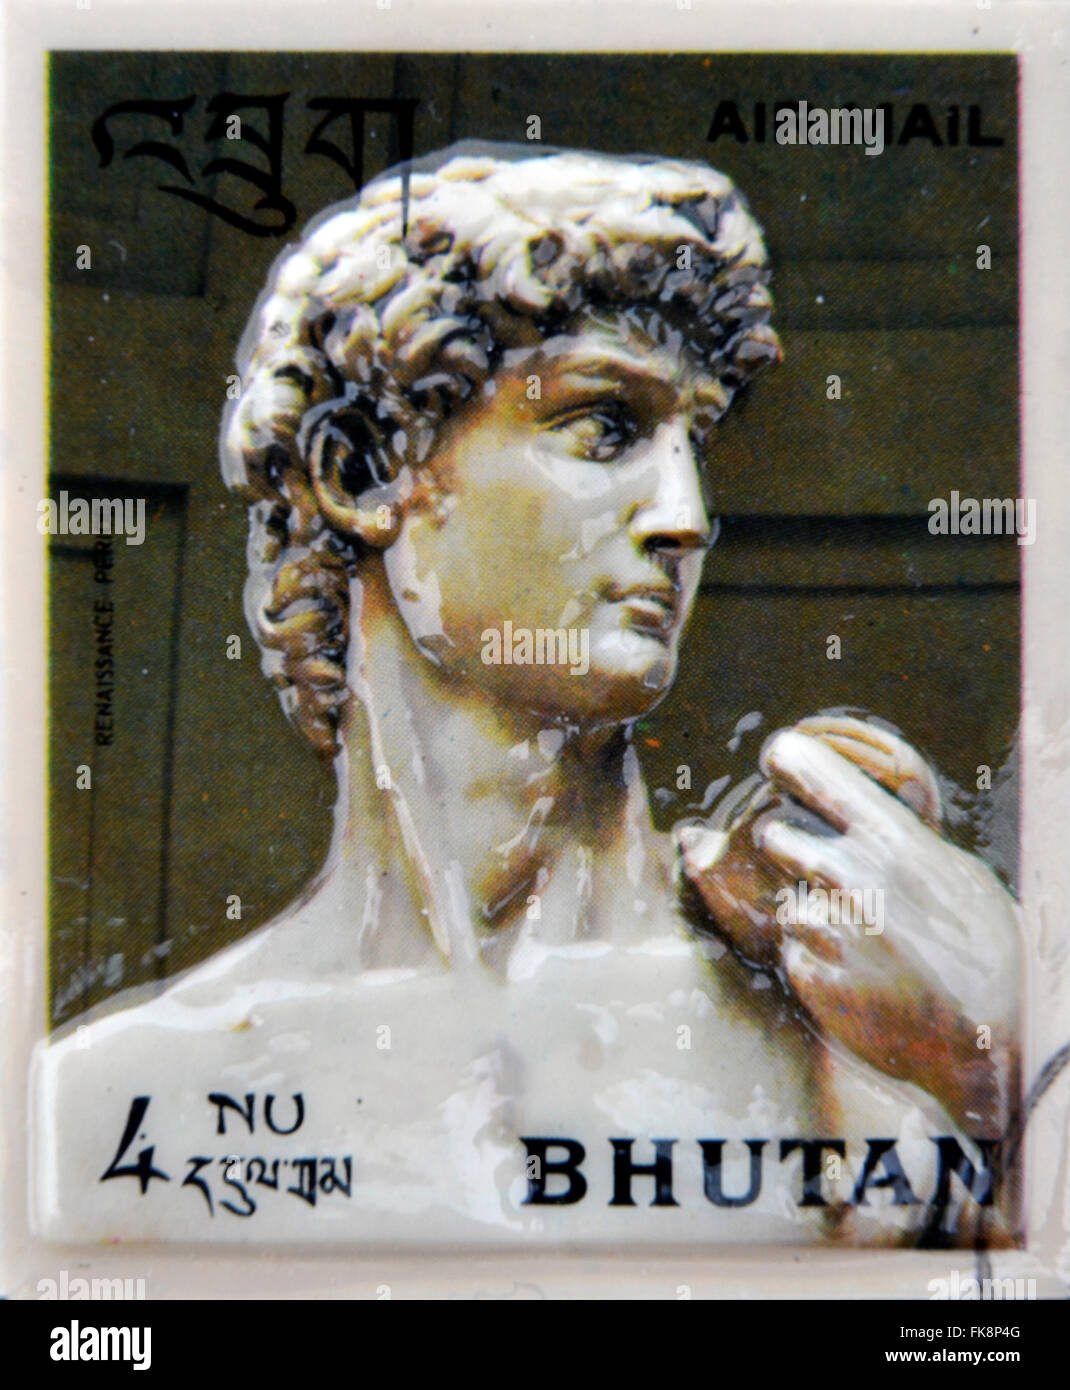 BHUTAN - CIRCA 1971: Stamp printed in Bhutan dedicated to History of Sculpture, shows David by Michelangelo, circa 1971 Stock Photo